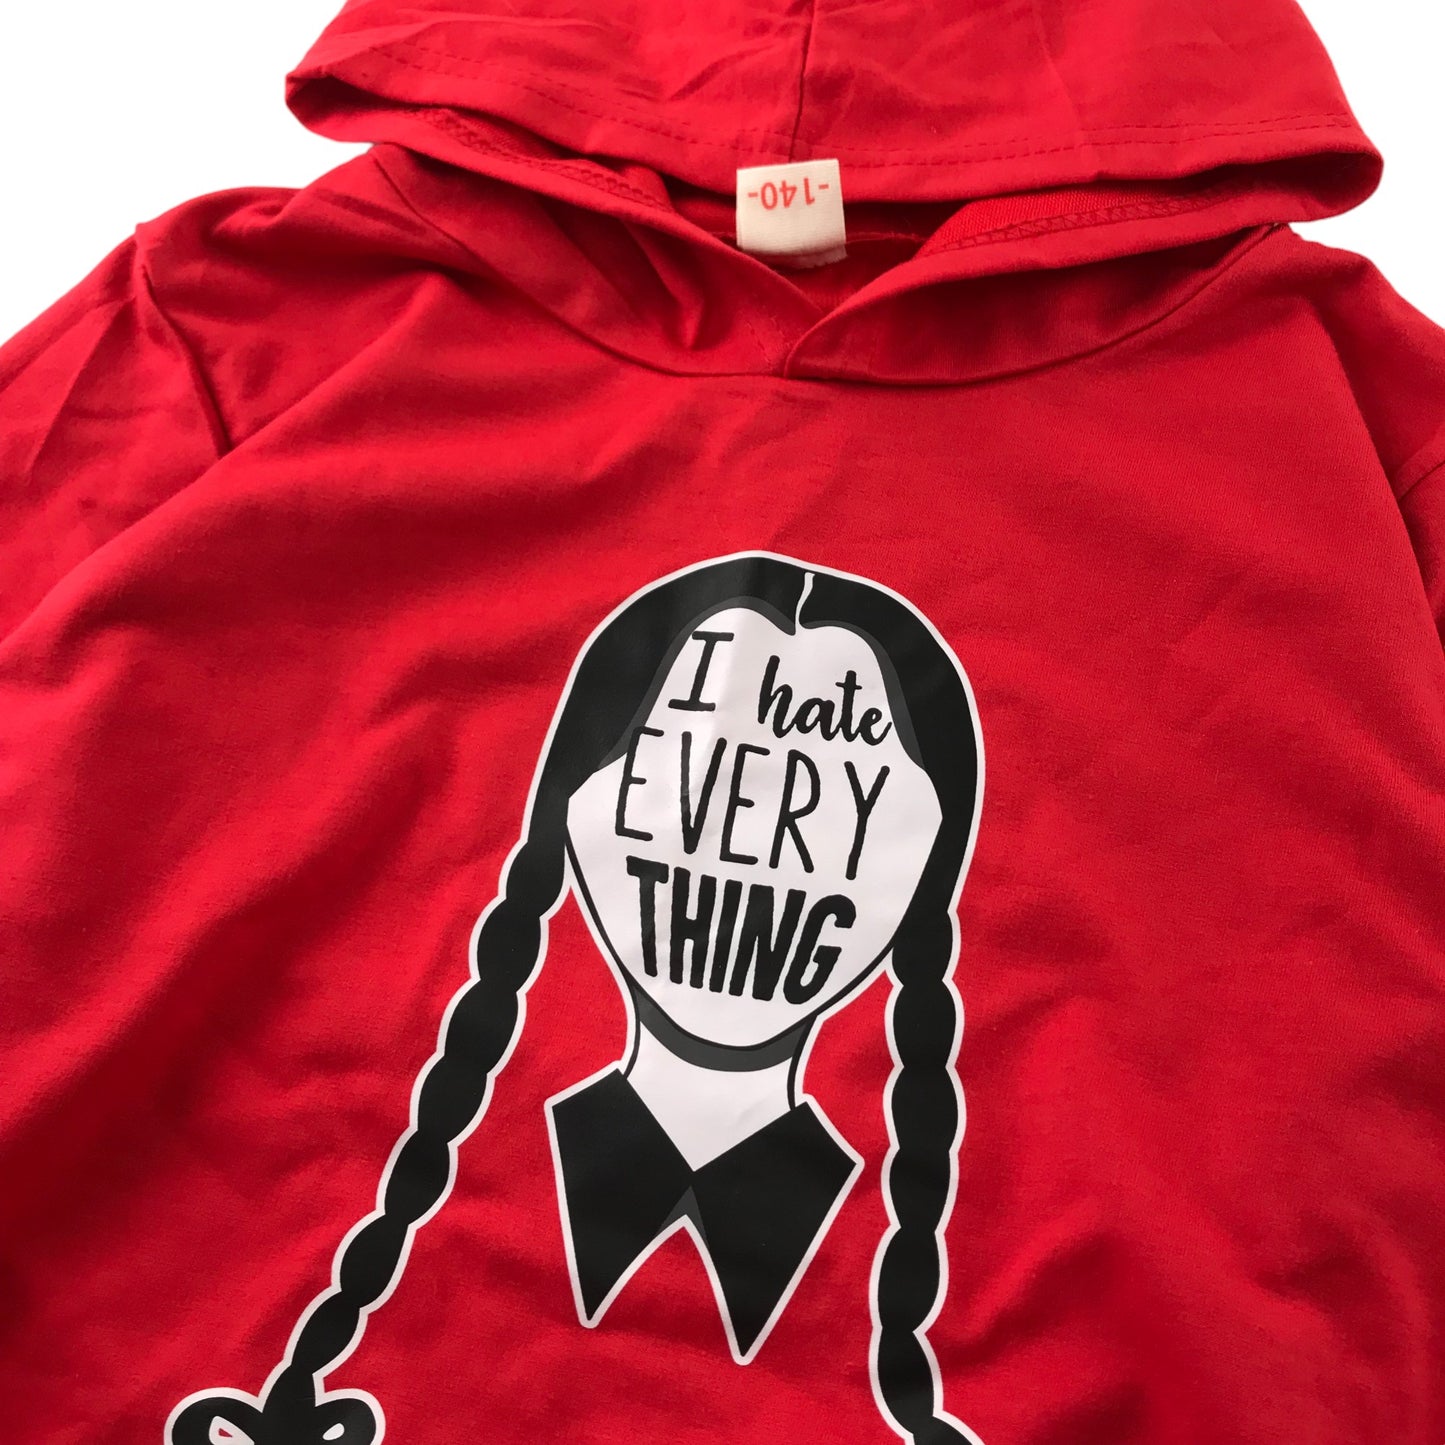 Hoodie and Joggers Set Age 7-9 Black and Red Wednesday Adams Print